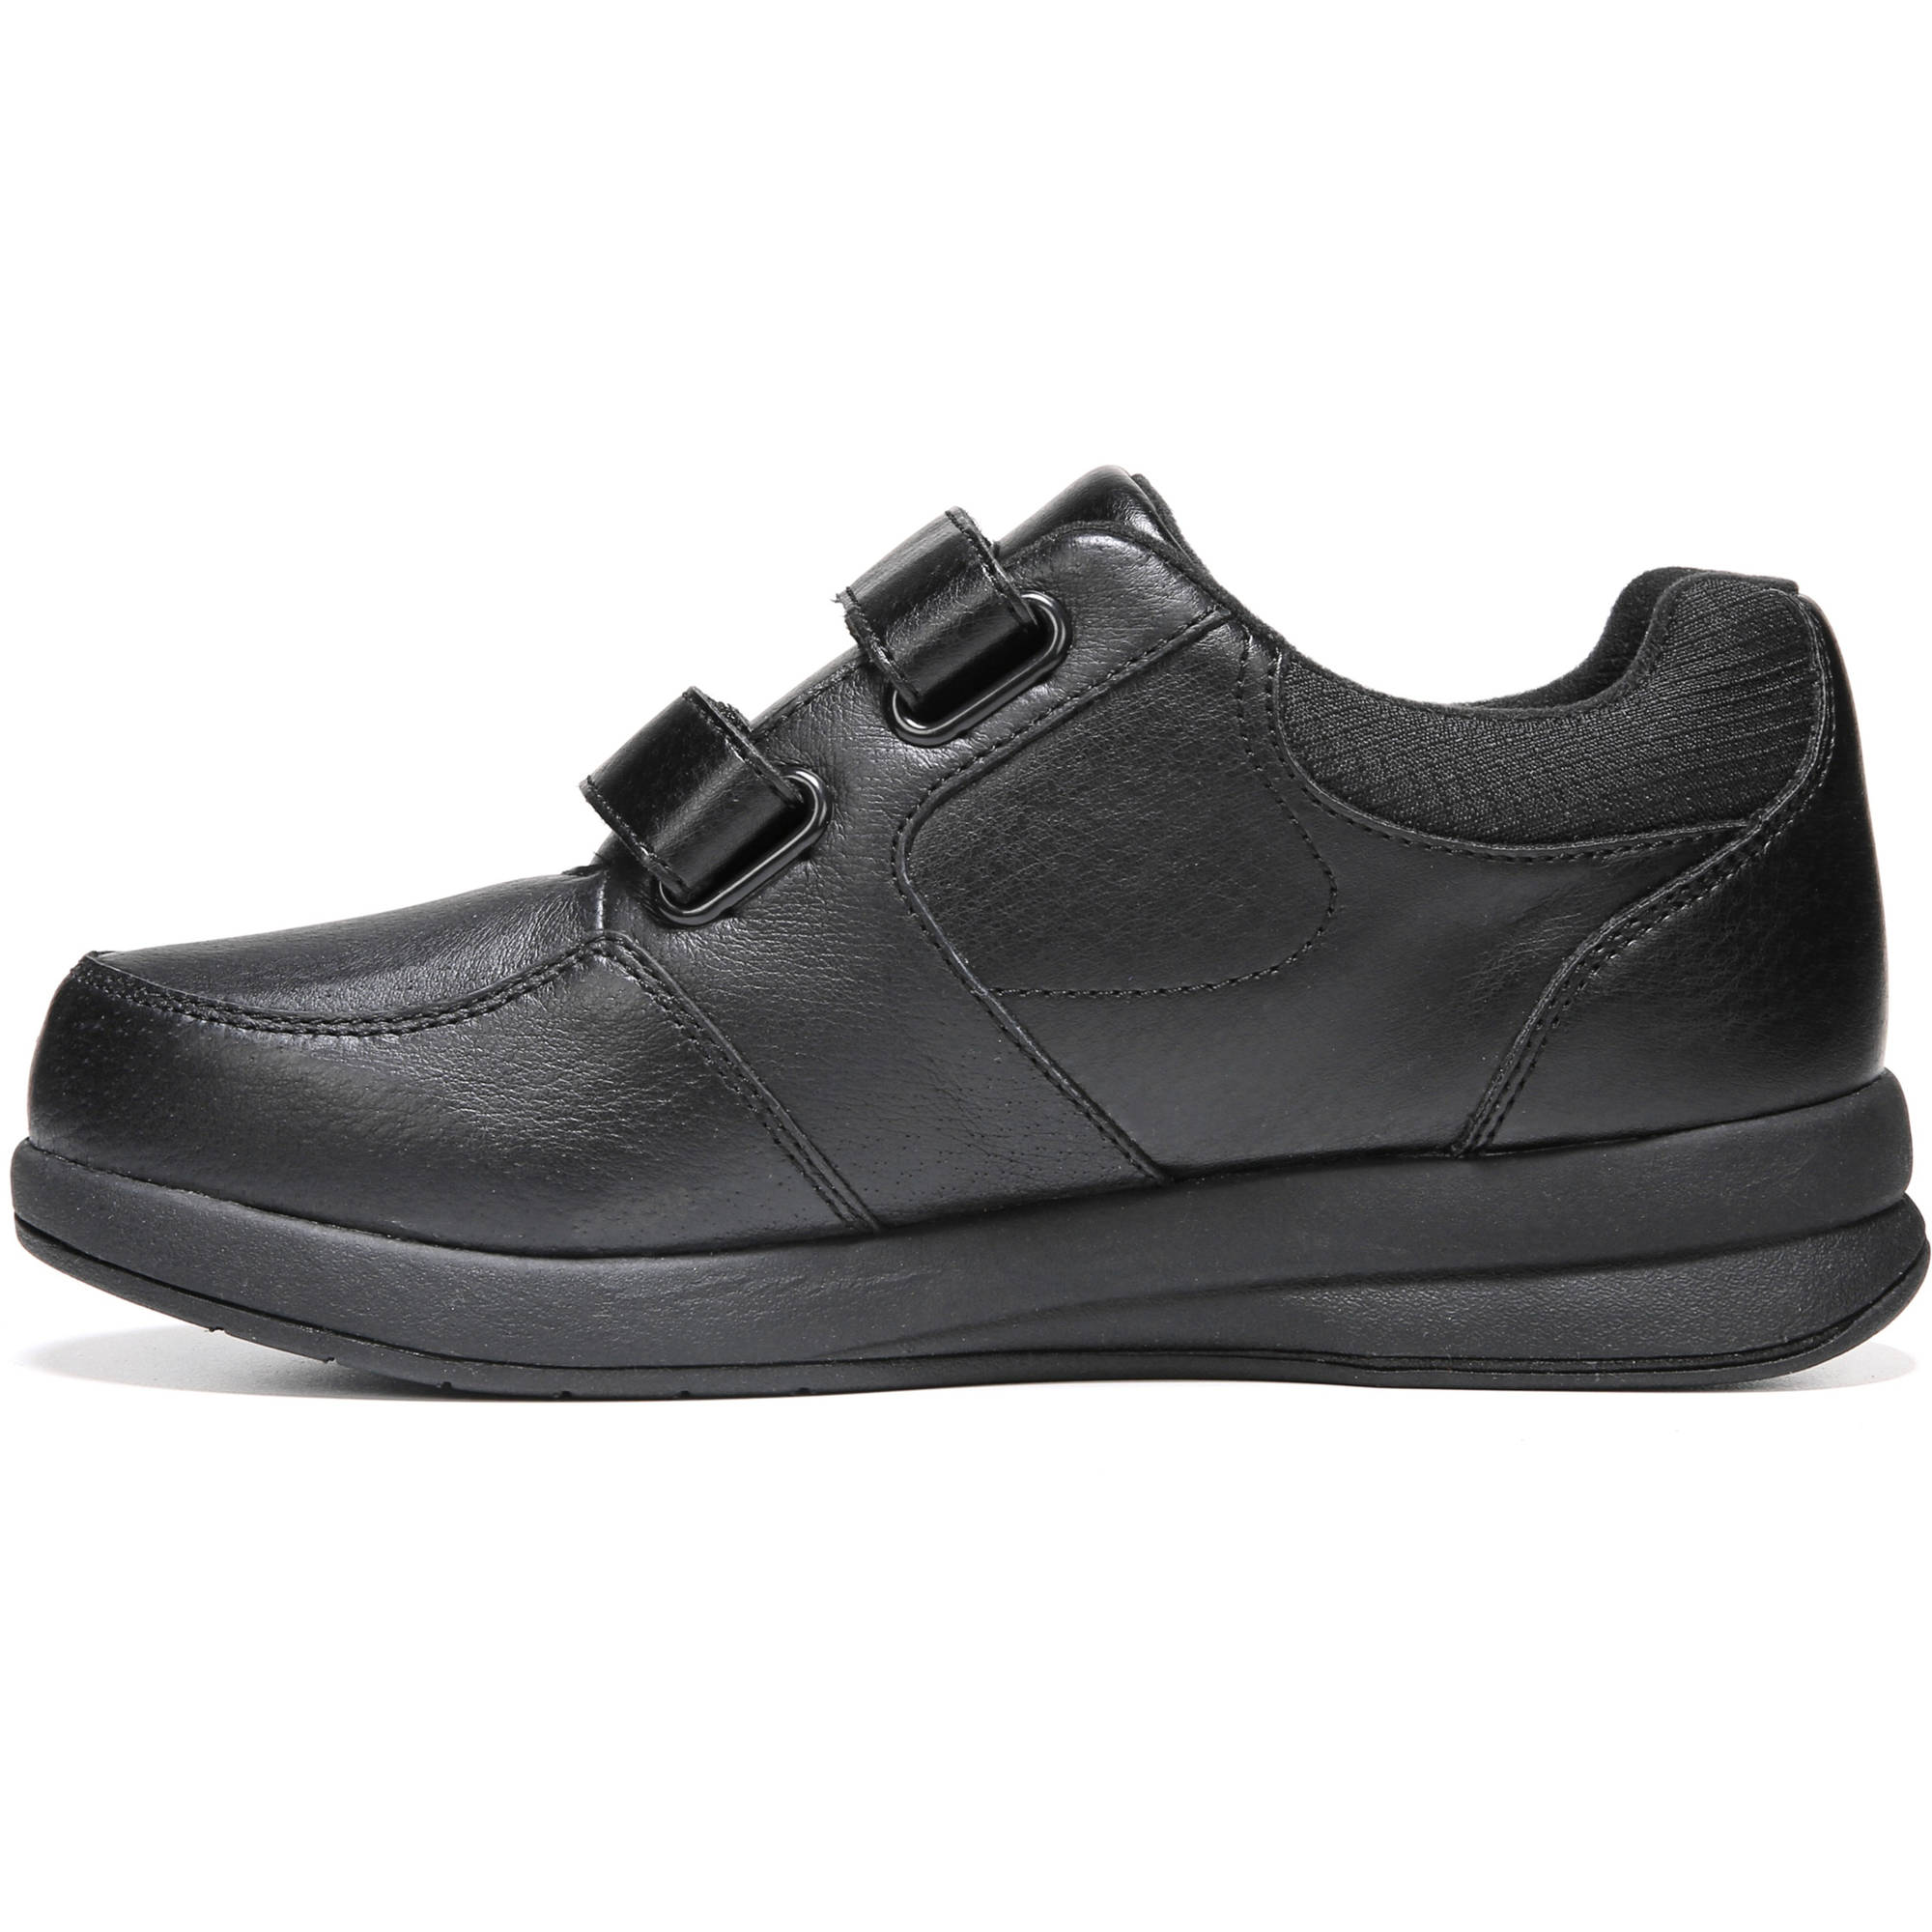 Dr. Scholls Women's Manner Therapeutic Casual Shoe, Wide Width - image 2 of 5